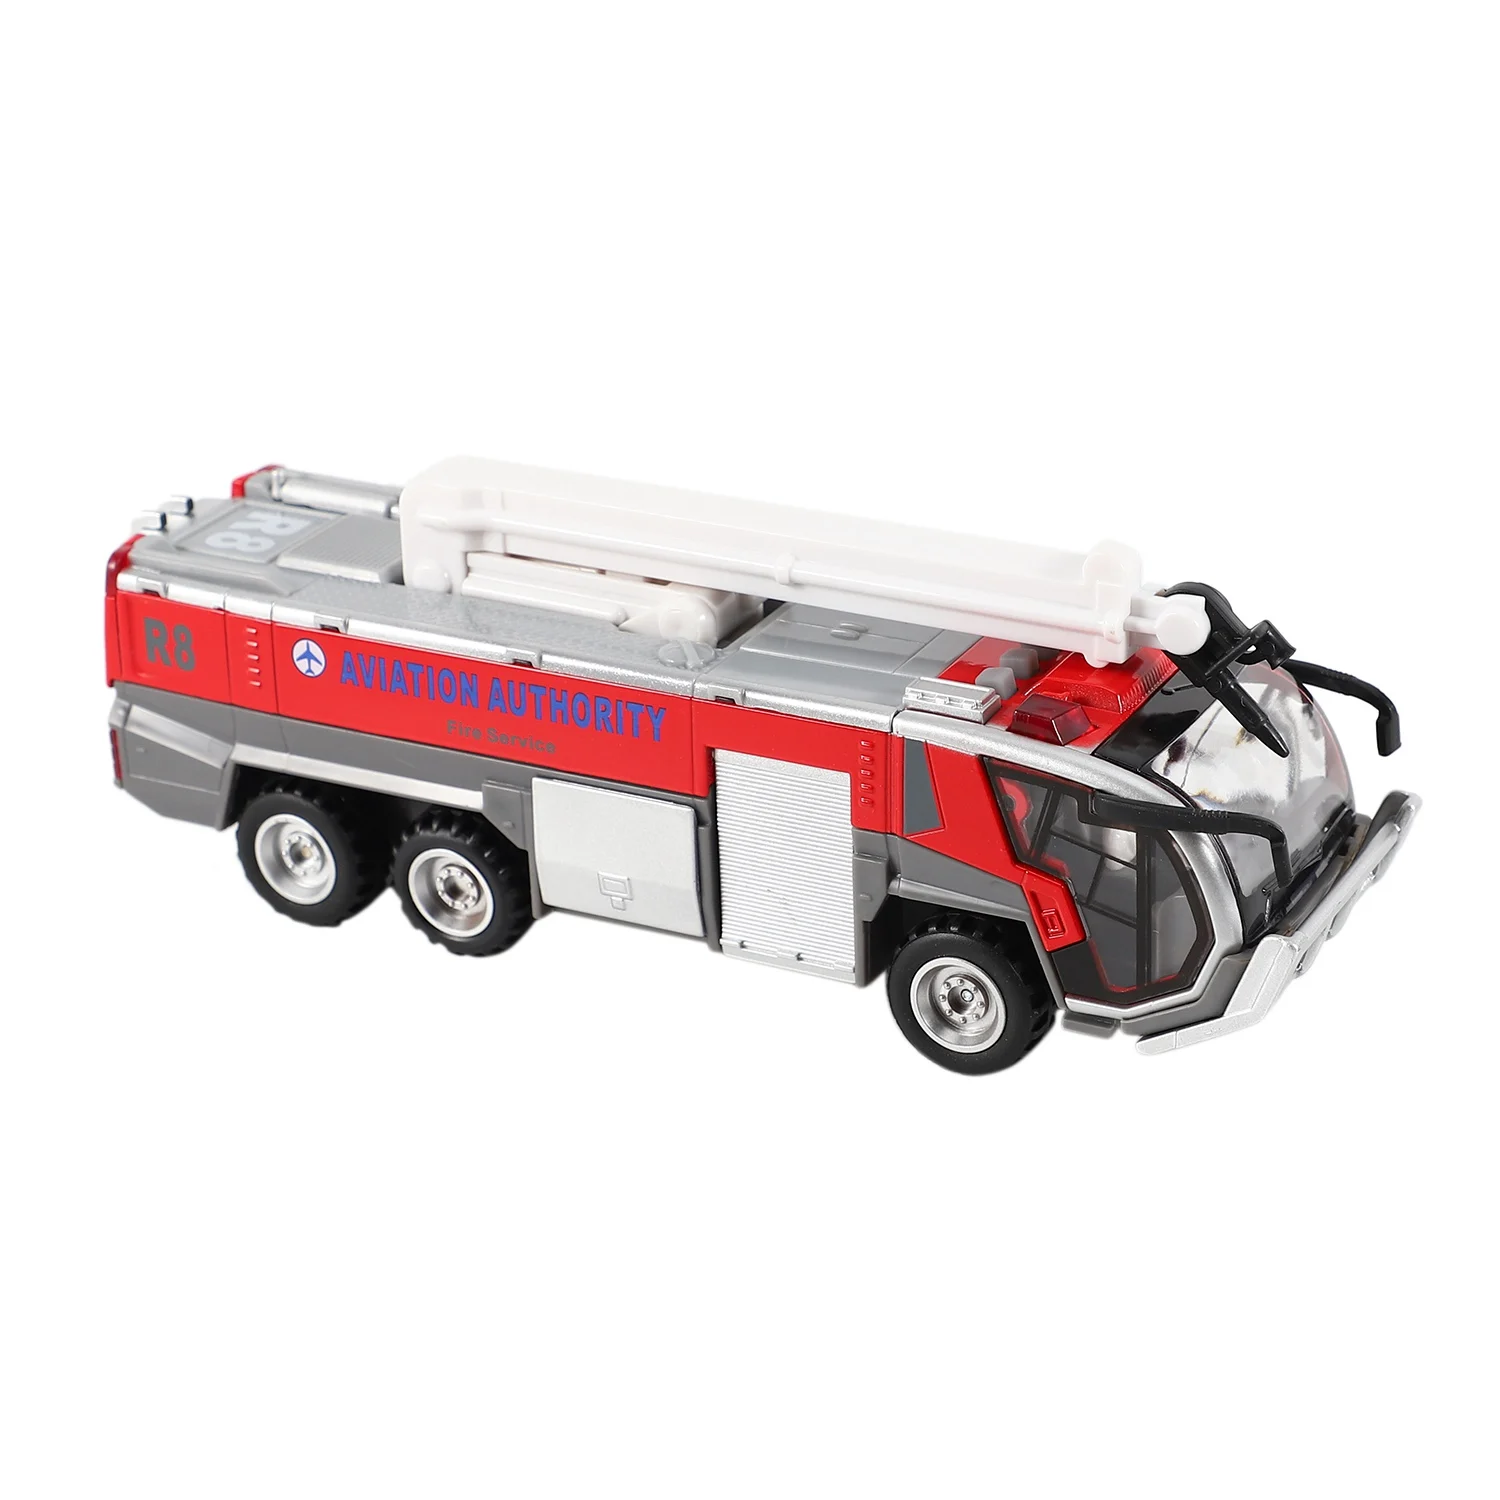 

1:32 Airport Fire Truck Fire Engine Electric Die-Cast Engineering Vehicles Car Model Toy with Sound Light Pull Back Gifts,Red